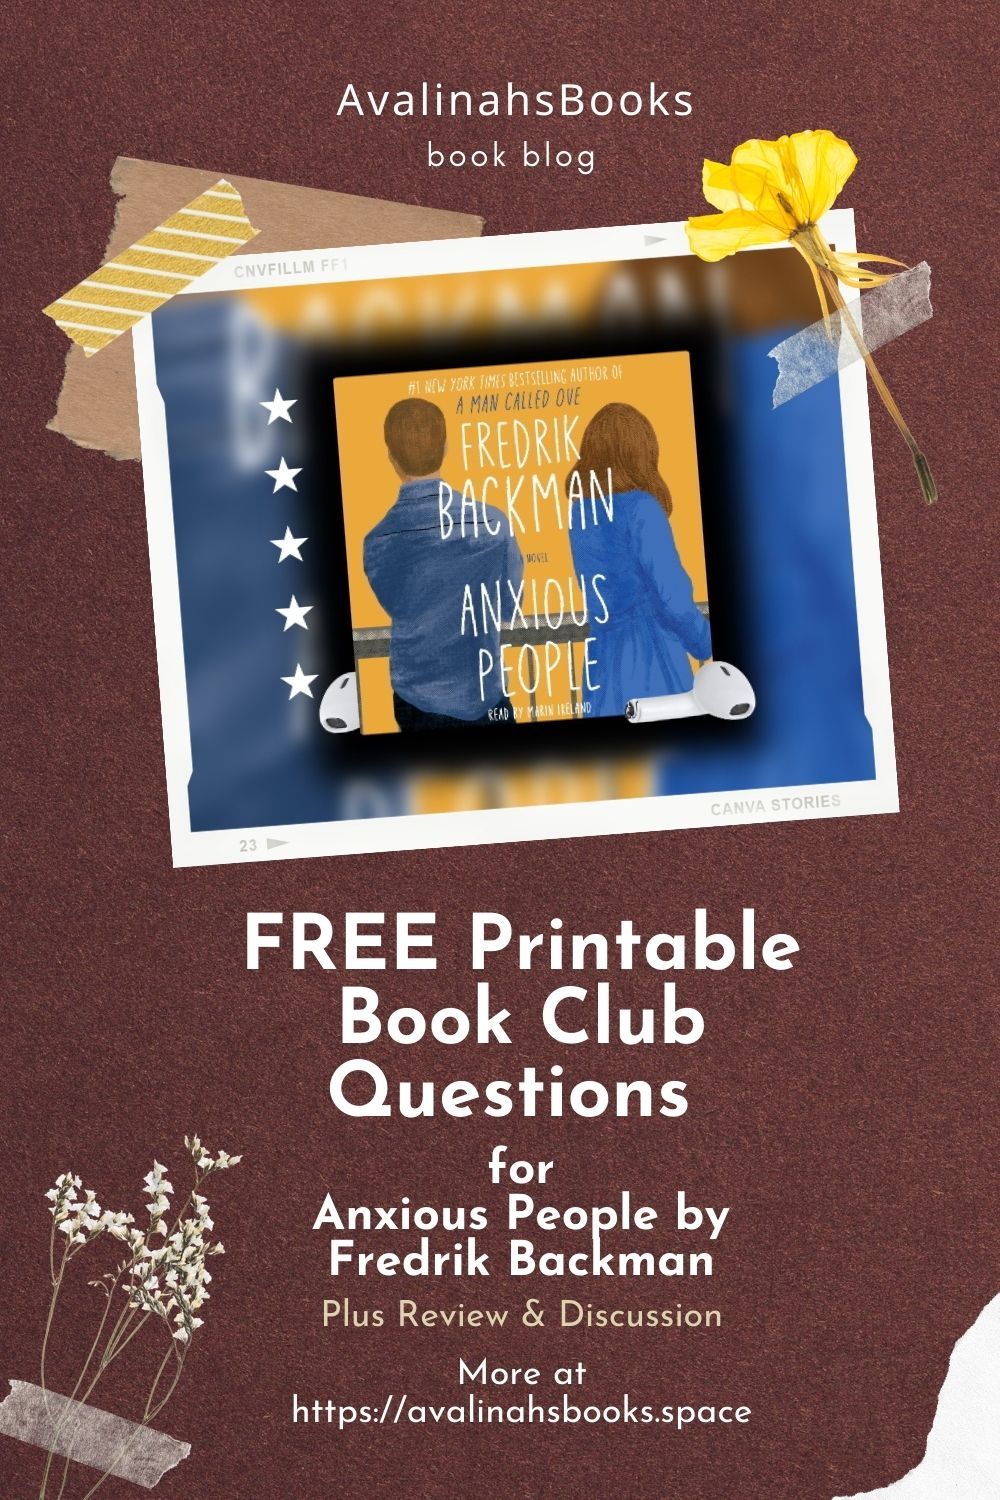 pin for book club questions for anxious people by fredrik backman